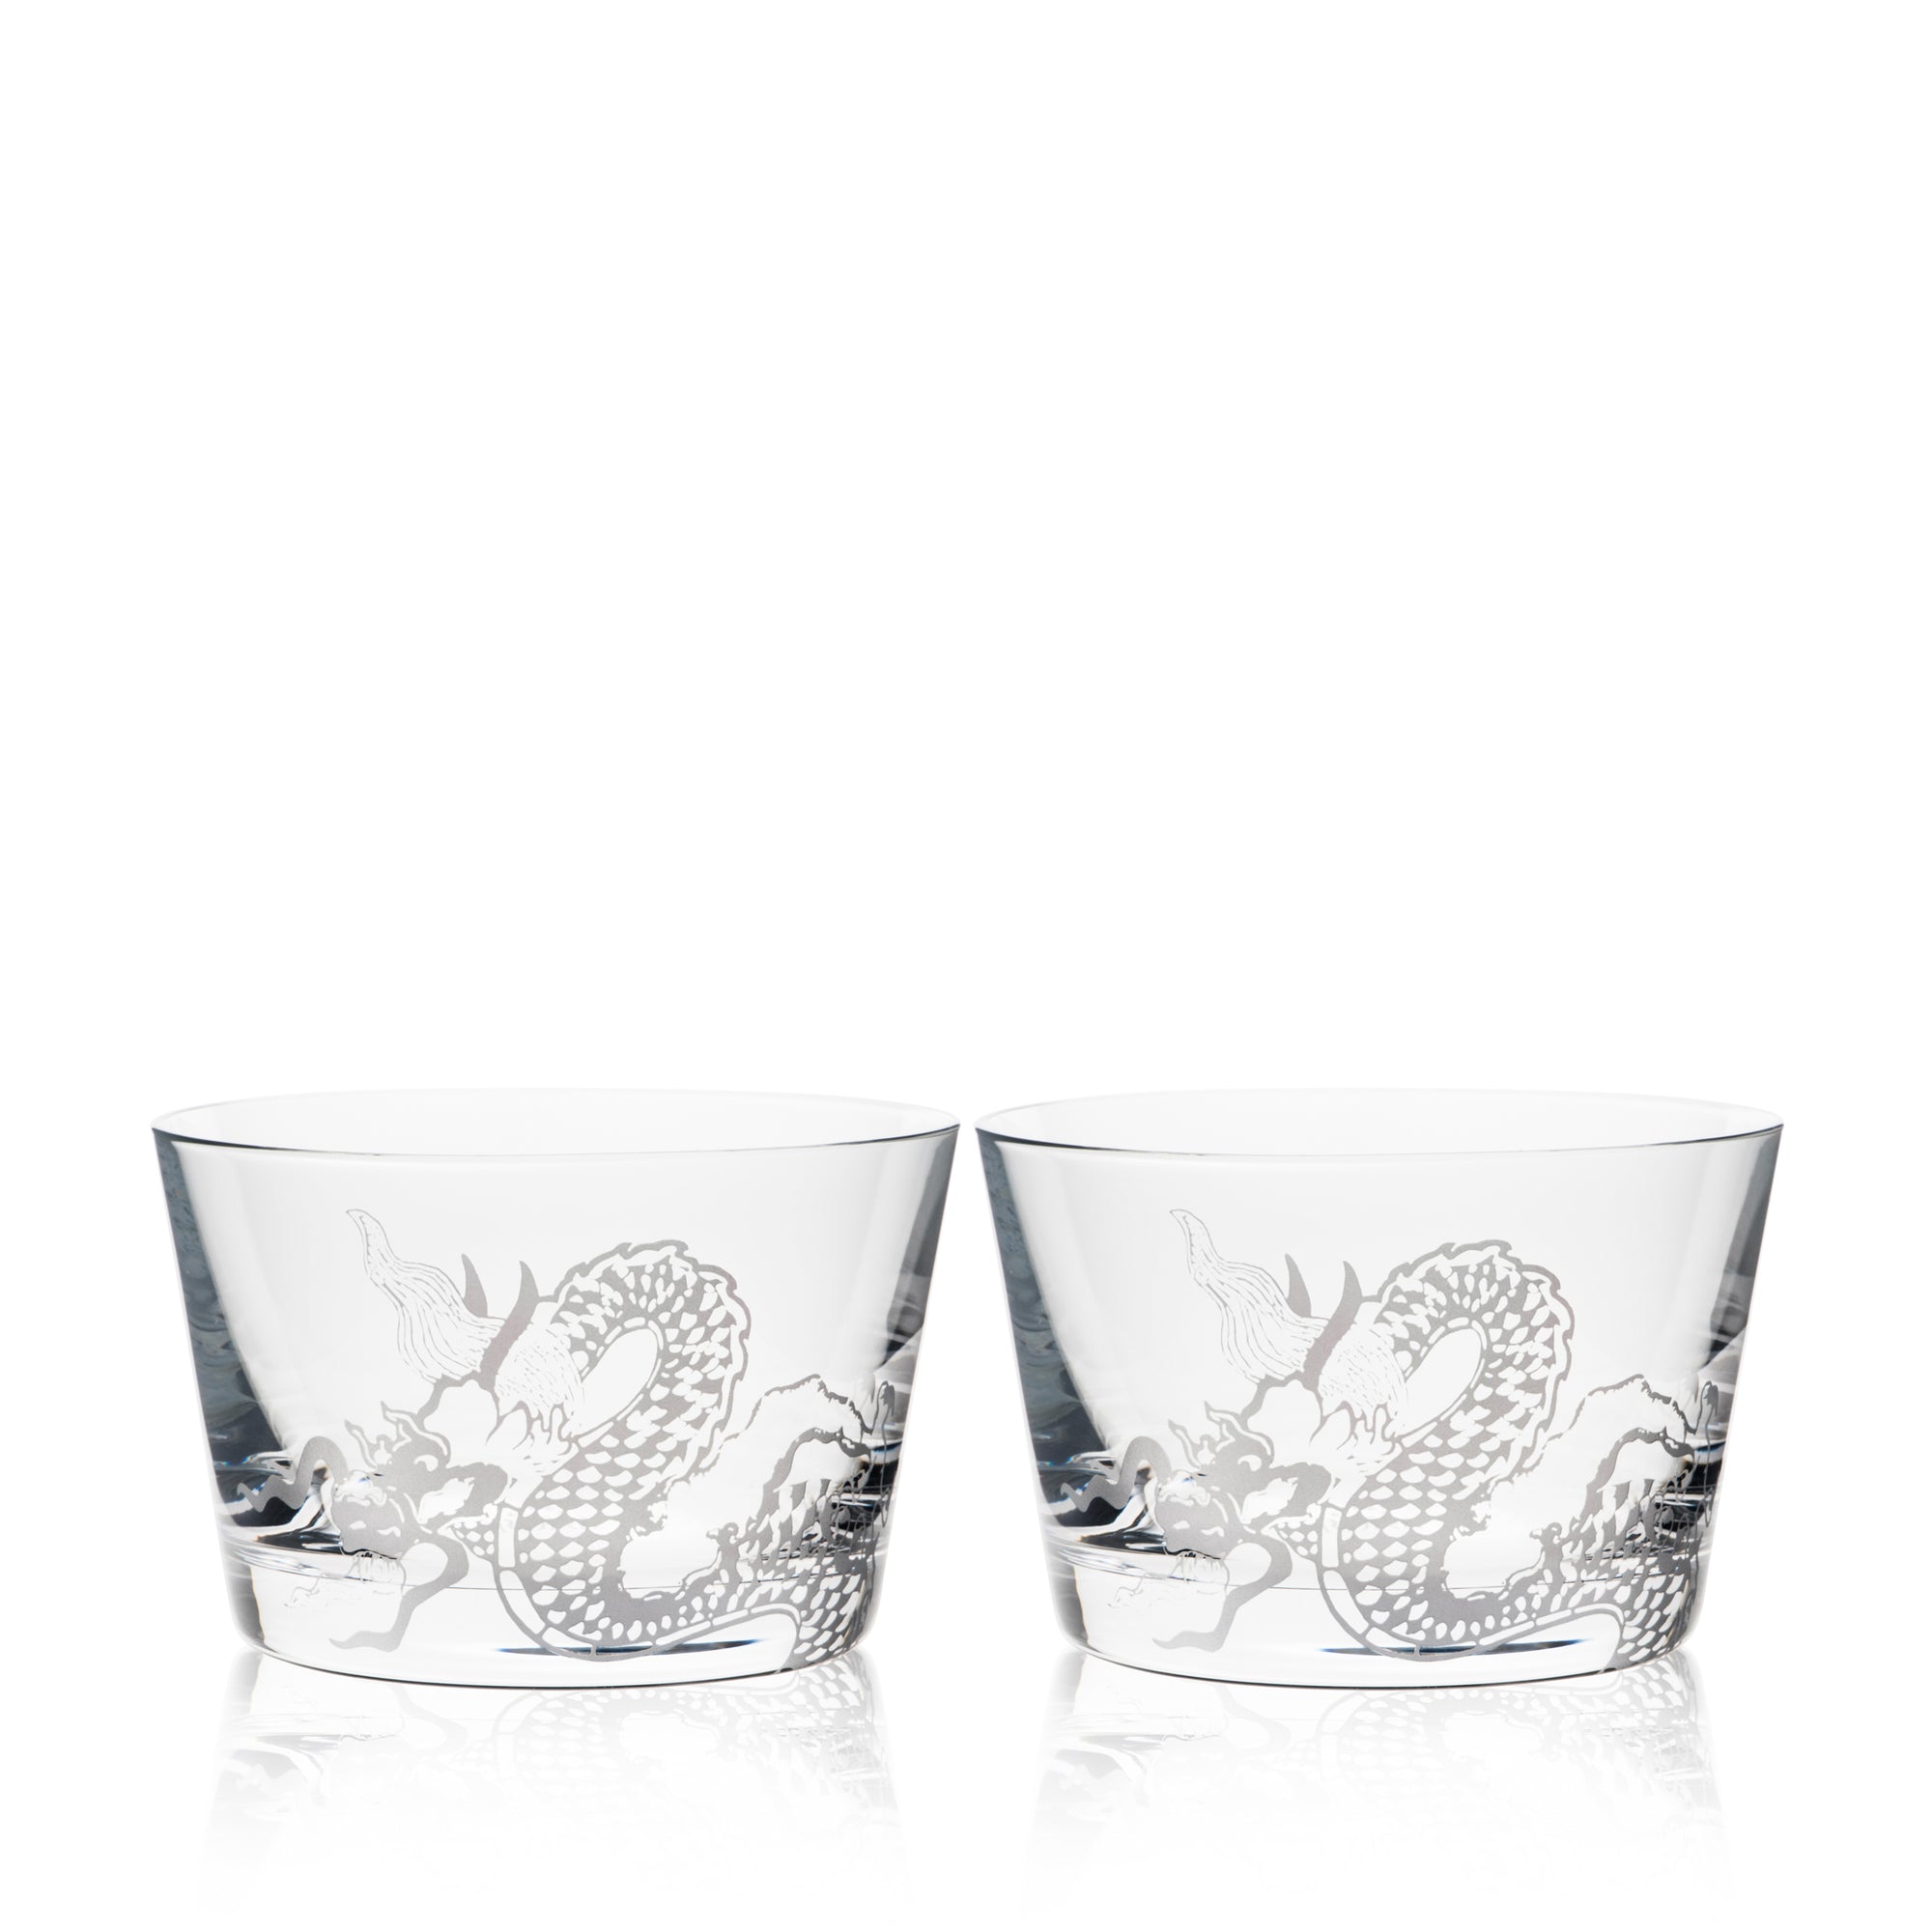 Dragon tidbit bowls set of two in sand-etched crystal from Caskata